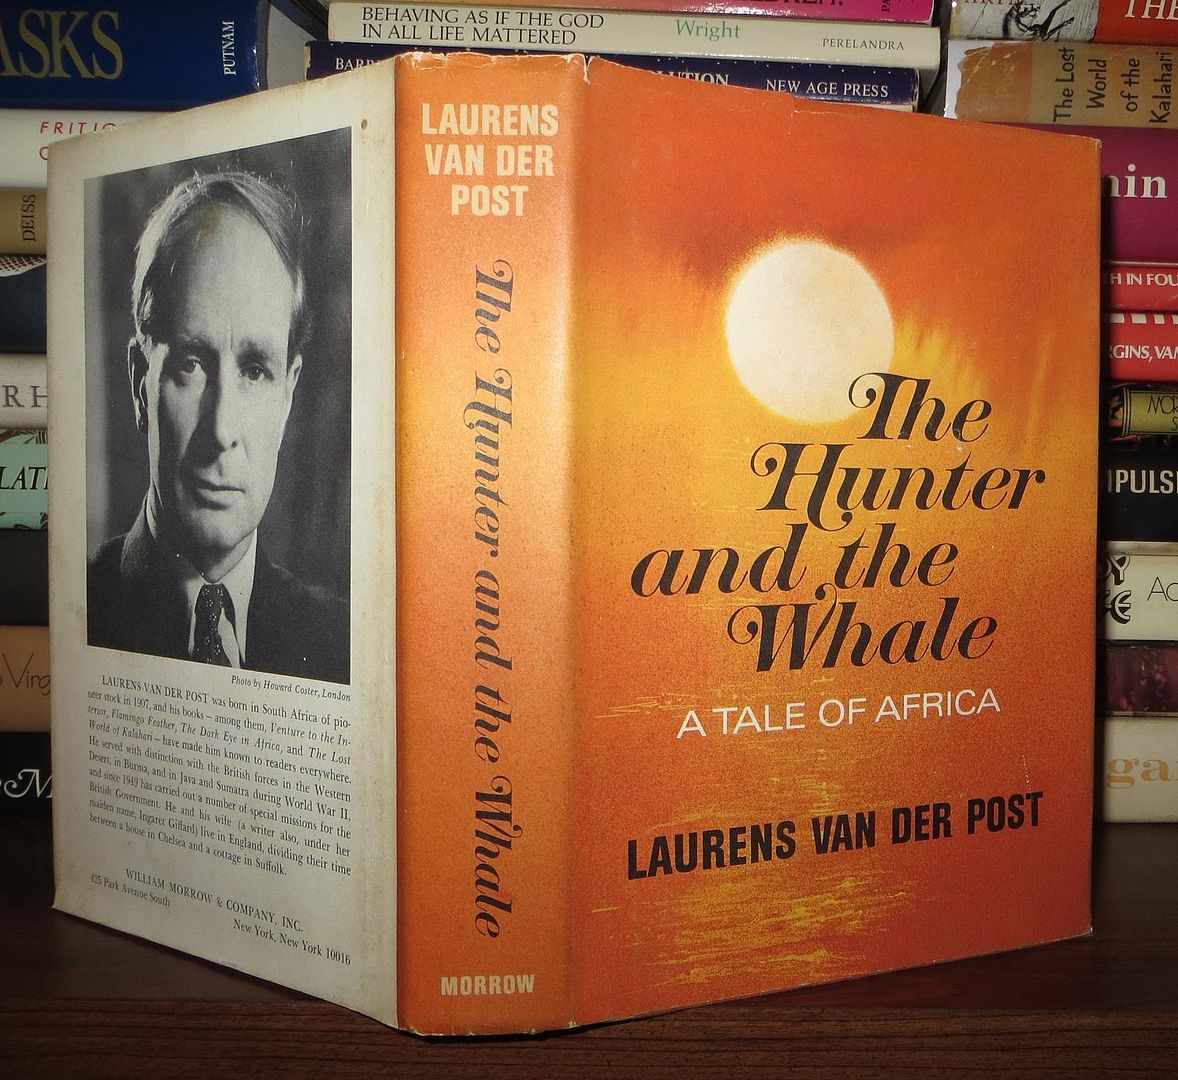 VAN DER POST, LAURENS - The Hunter and the Whale